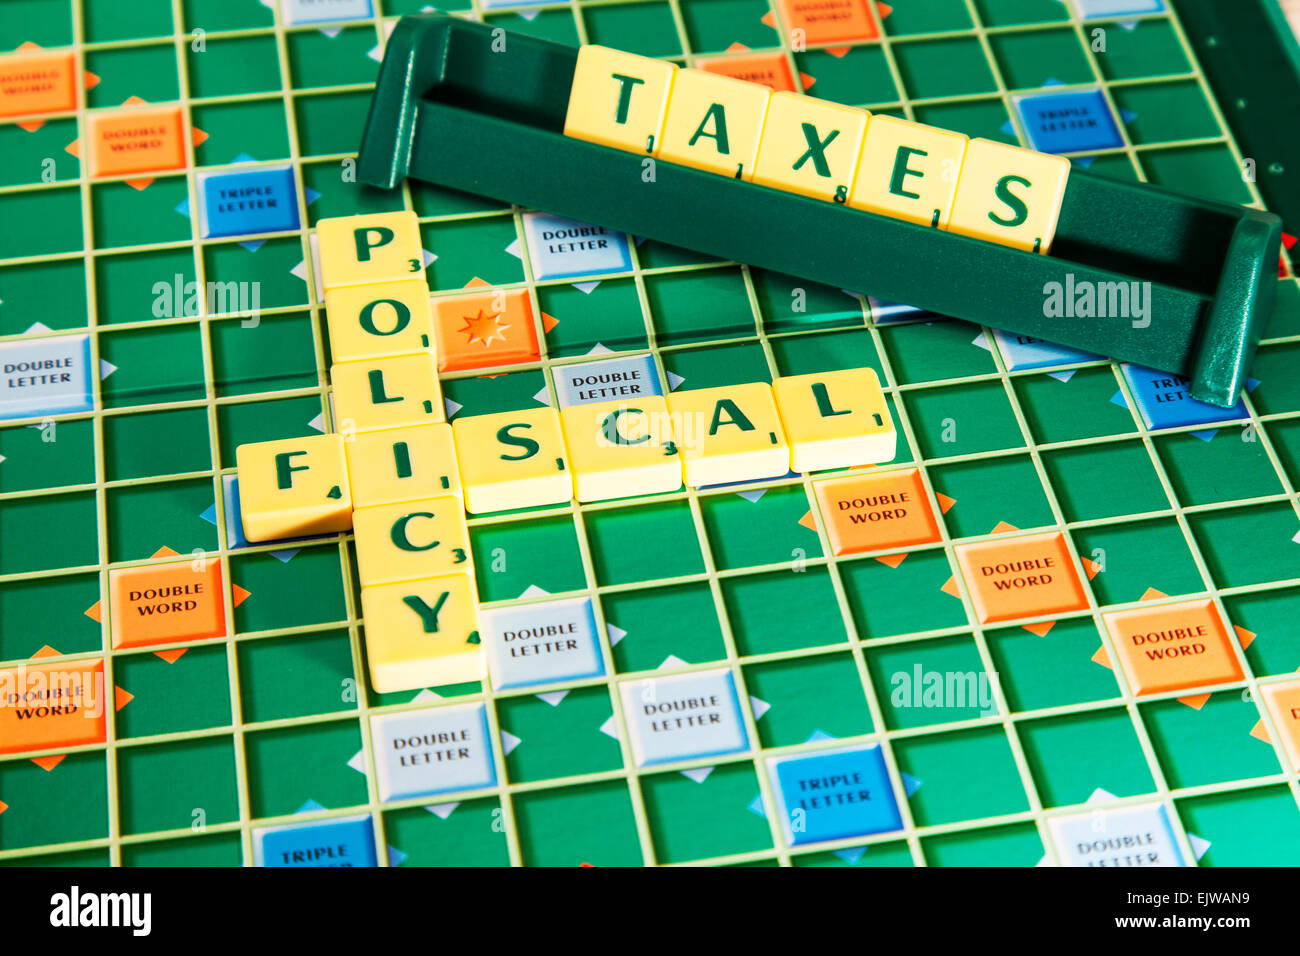 fiscal policy economy government election words using scrabble tiles to illustrate spelling spell out Stock Photo